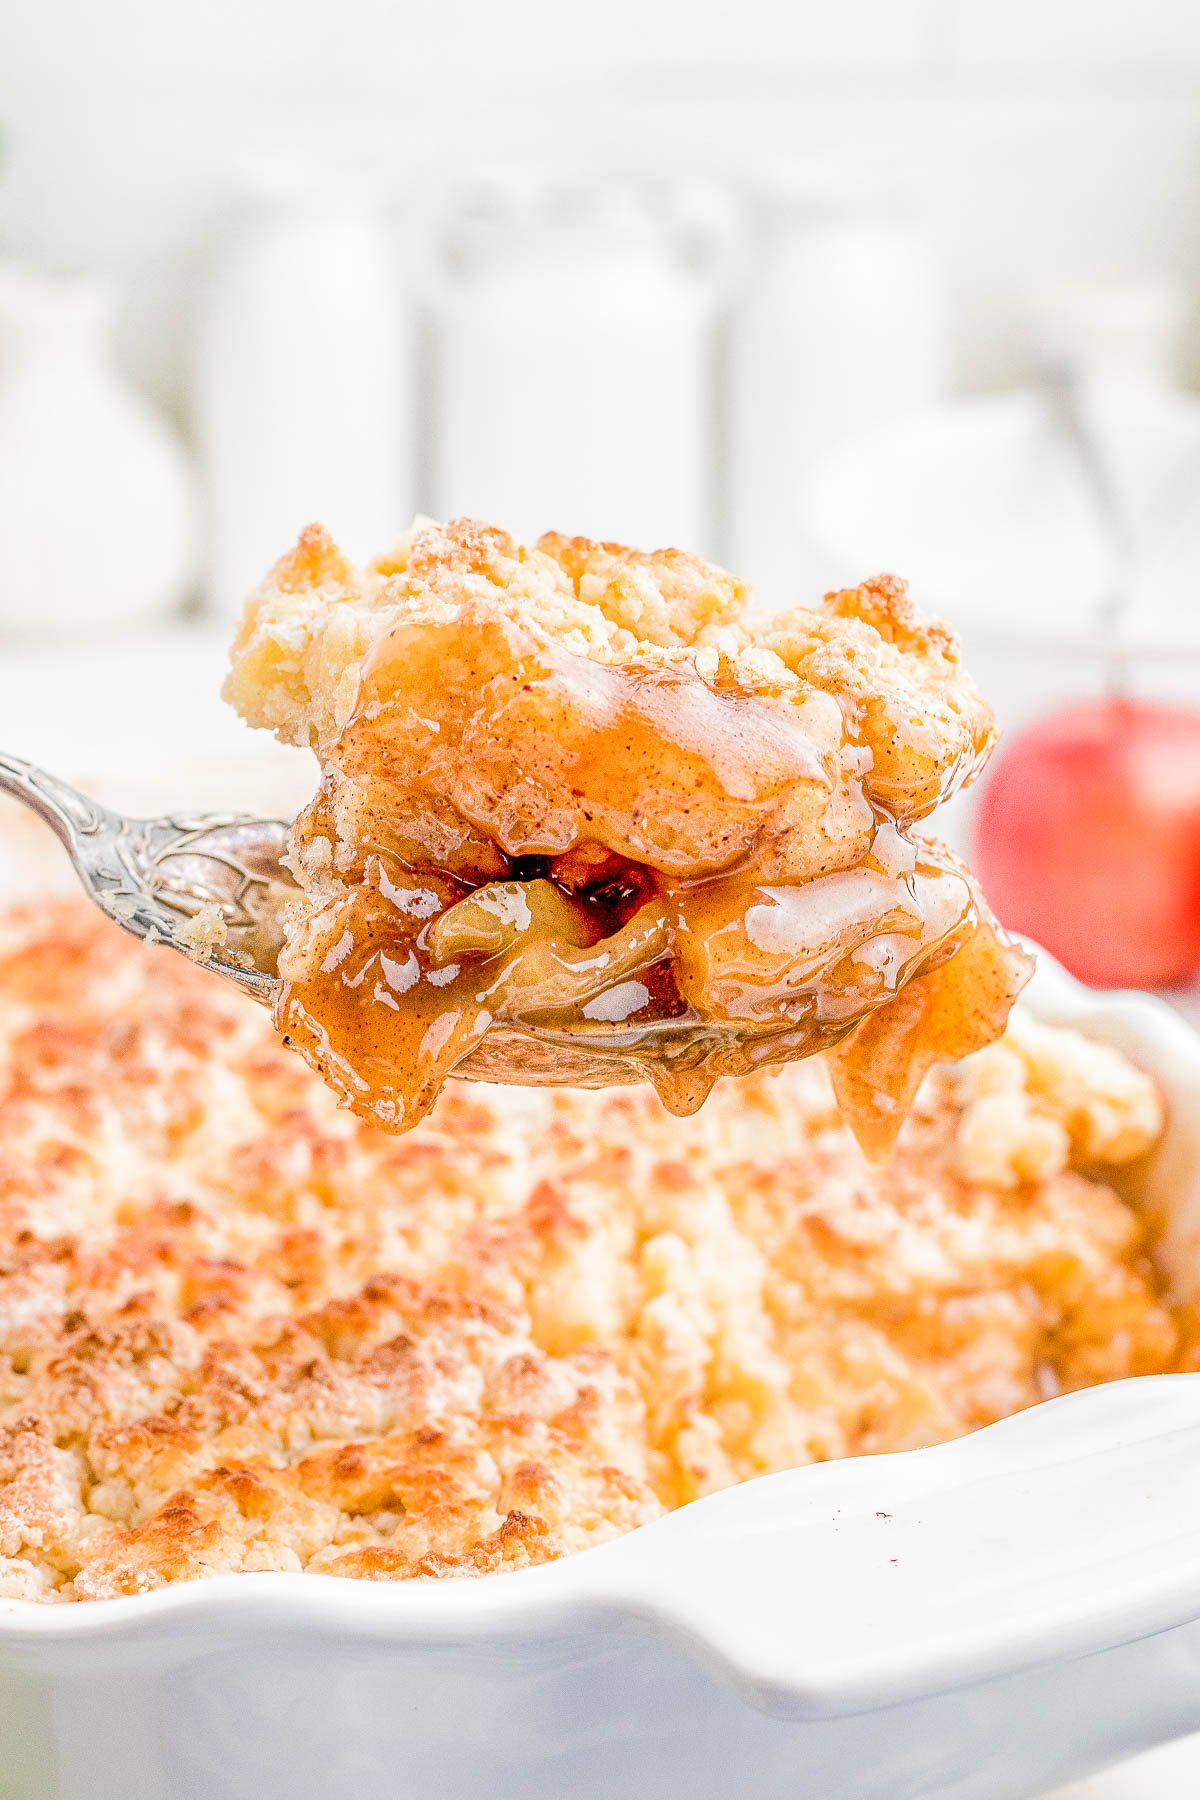 Easy Apple Cobbler — A spiced apple filling is topped with a sweet biscuit topping before being baked to golden brown and bubbly perfection! Apple cobbler is such an EASY dessert to make and tastes even better when drizzled with caramel sauce and served with a scoop of ice cream! 